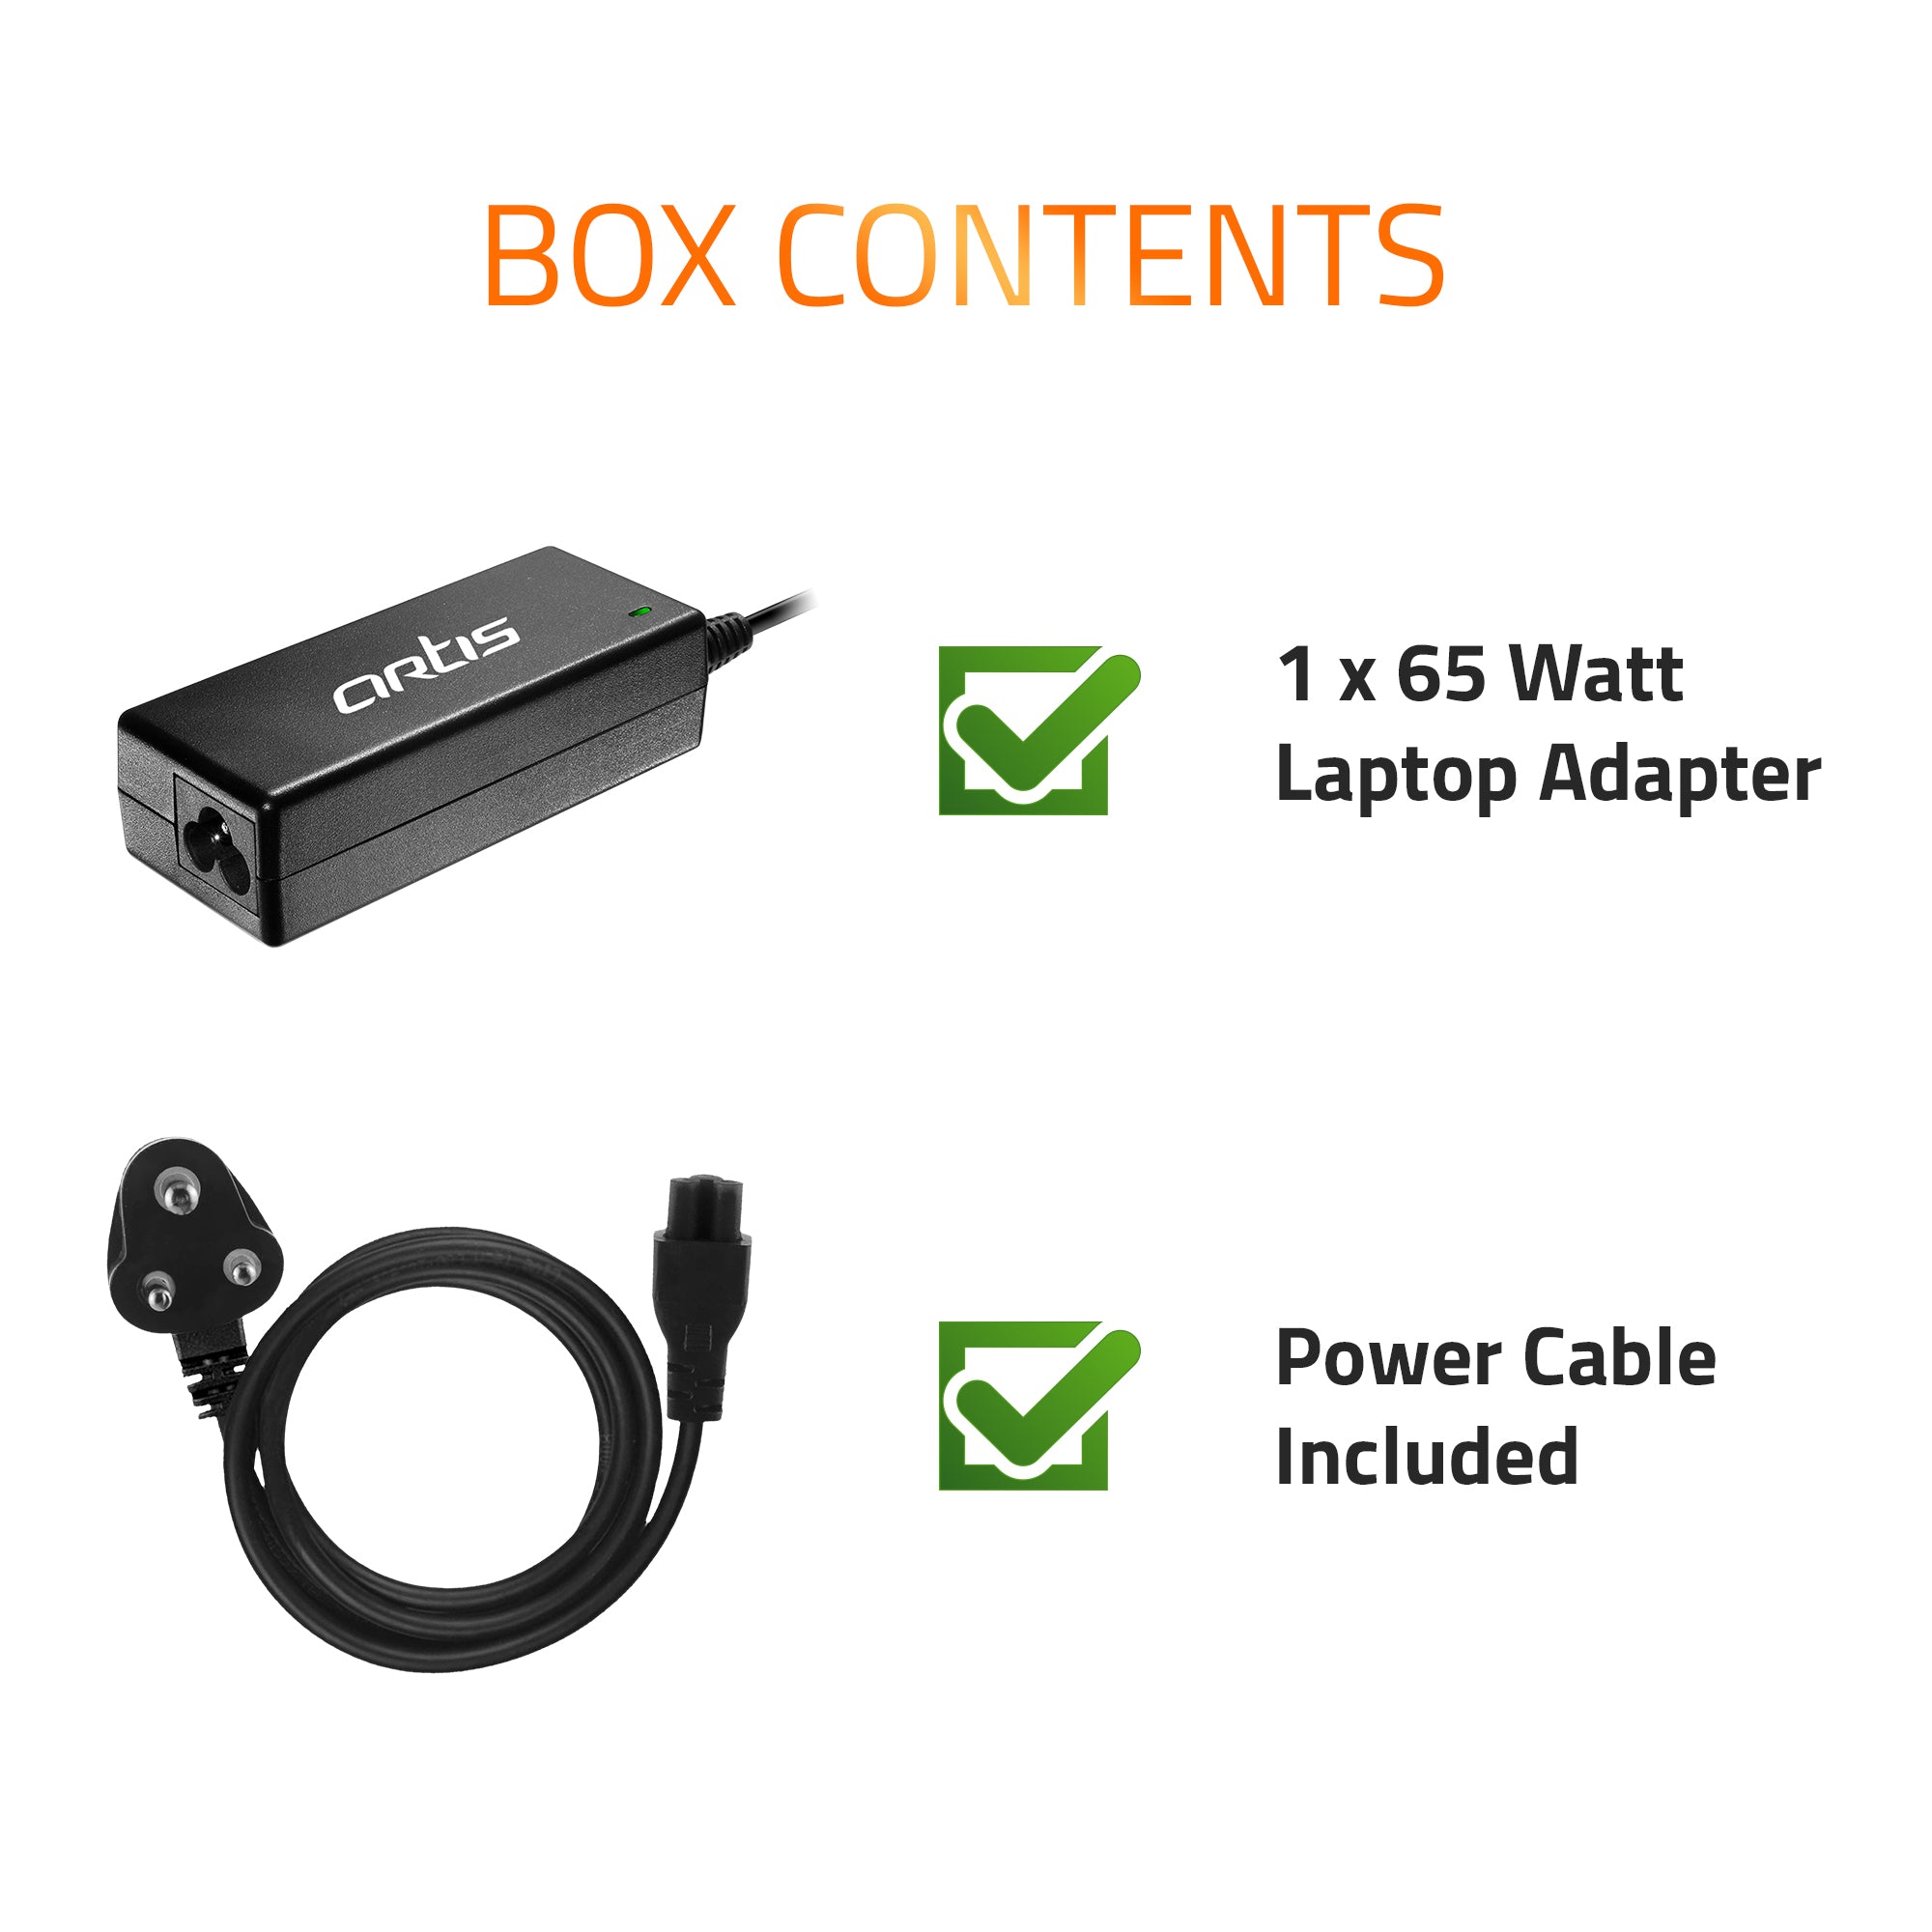 AR0503 65Watt Laptop Adapter Compatible with Acer Laptops (19V/3.42A ,Pin : 5.5 x 2.1 mm)